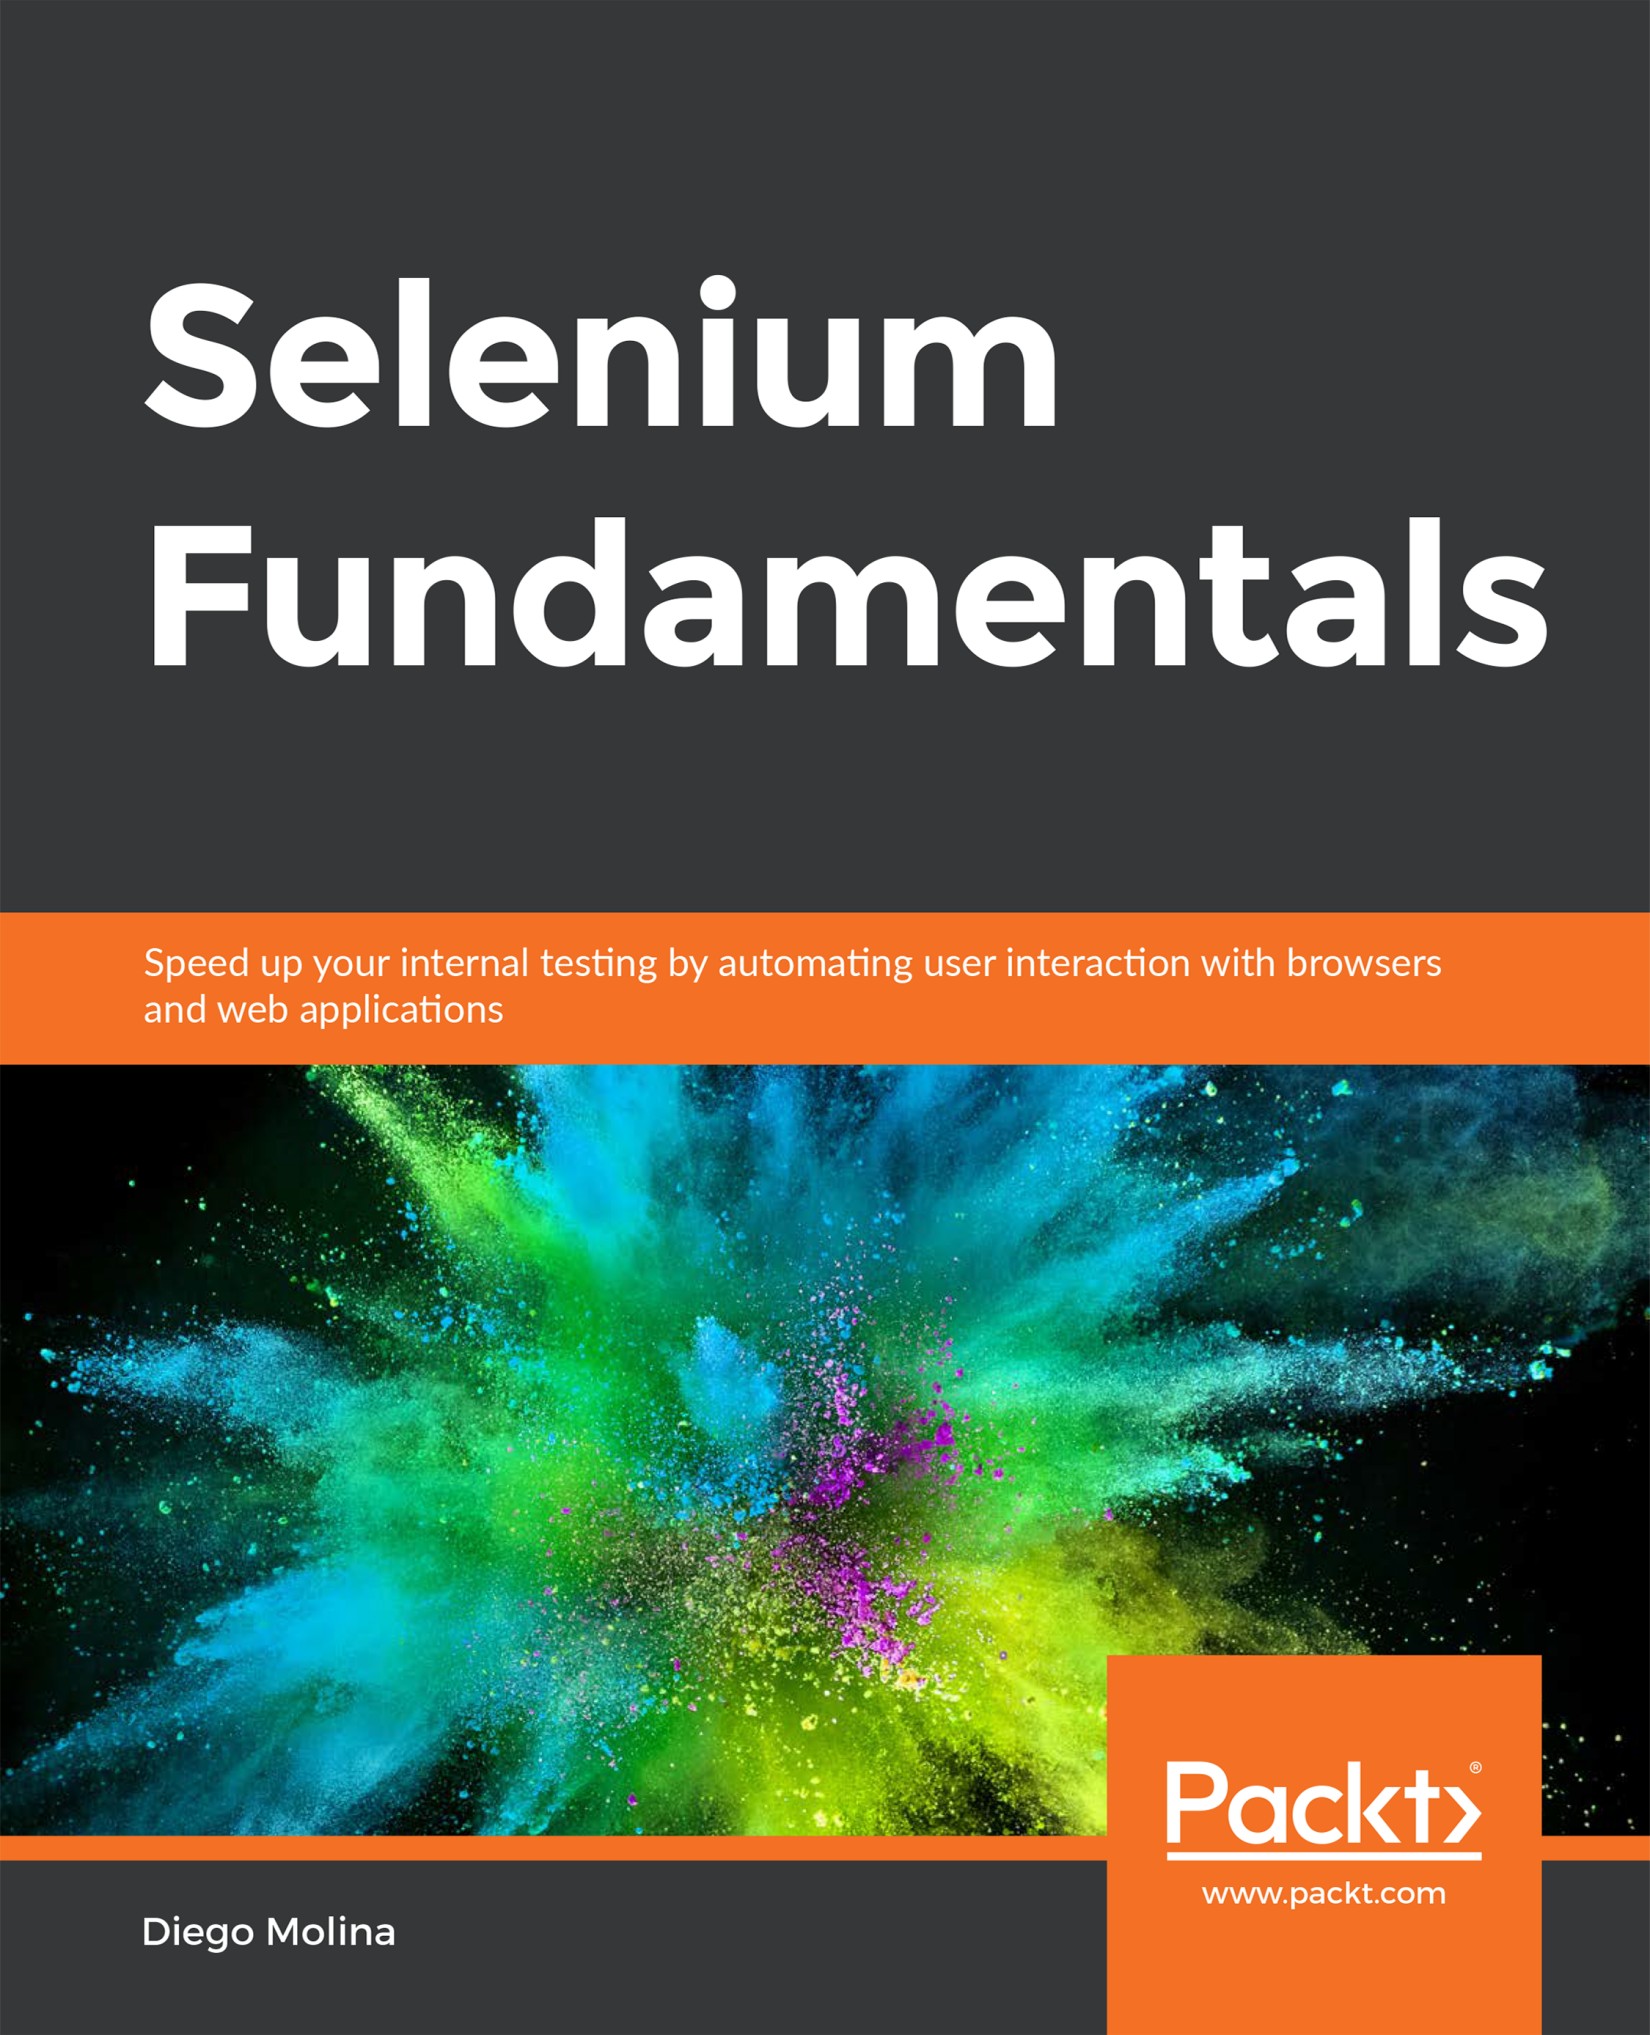 Selenium Fundamentals: Speed Up Your Internal Testing by Automating User Interaction With Browsers and Web Applications